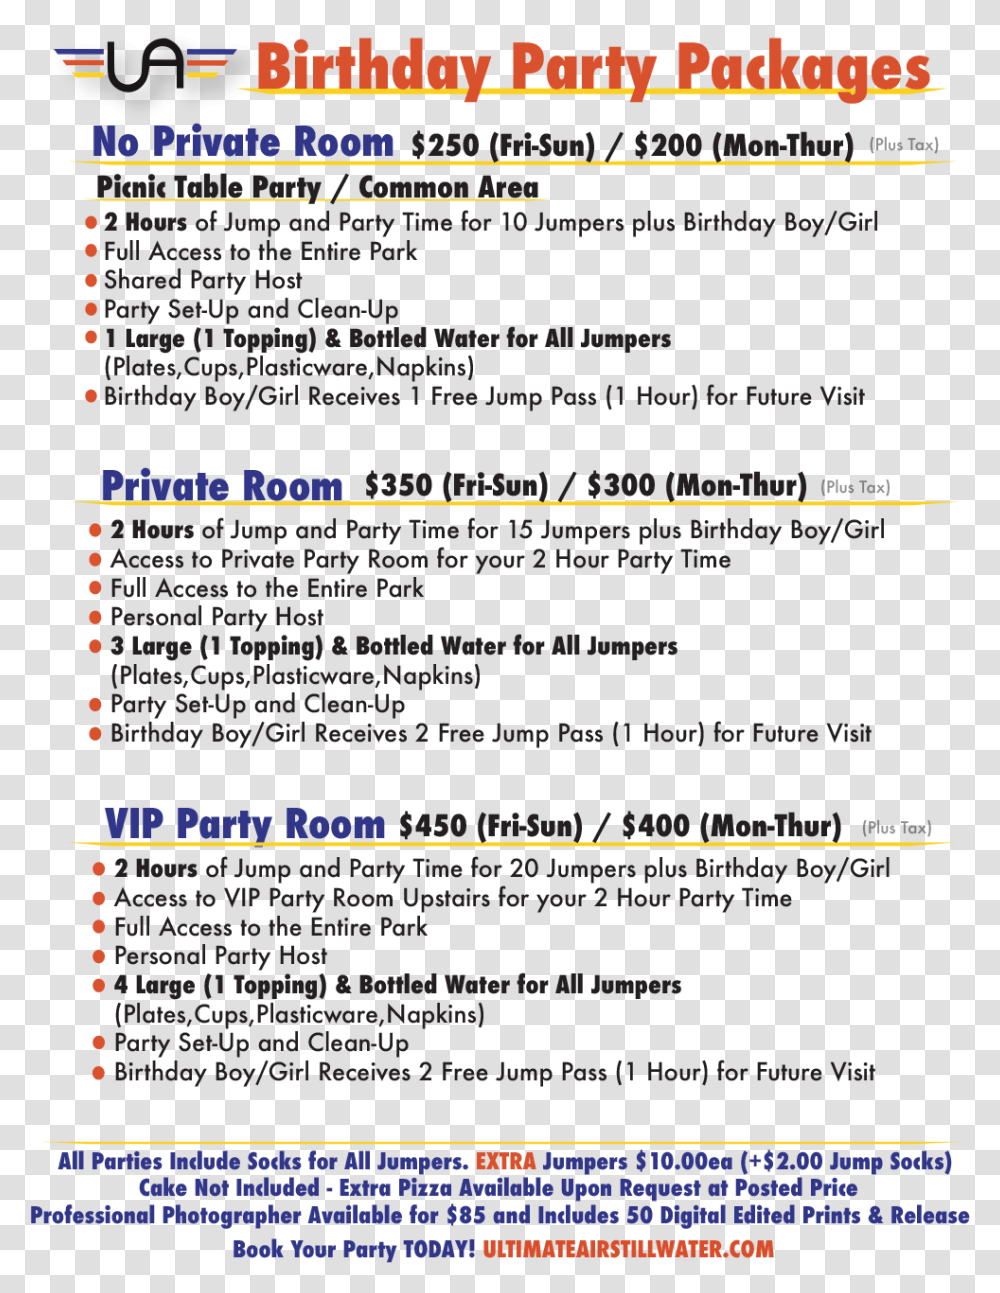 Ultimate Air Trampoline Park Fun Things To Do For A Birthday, Page, Flyer, Poster Transparent Png